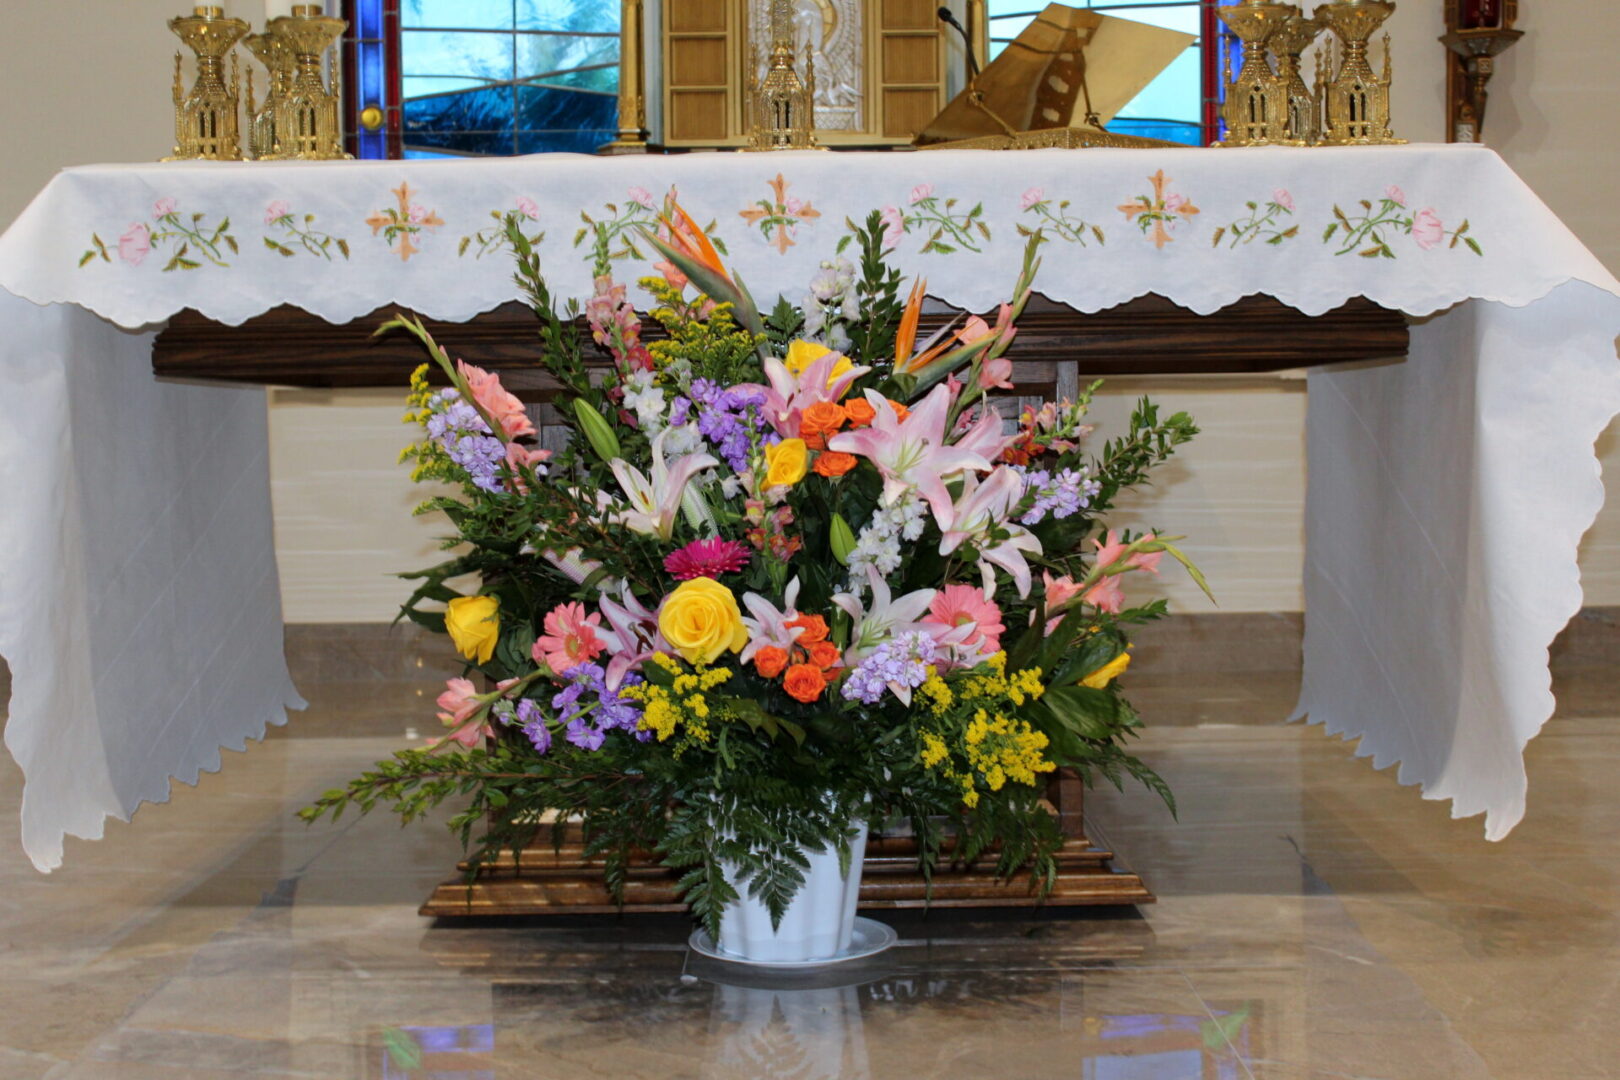 A vase of colorful flowers in front of the altar